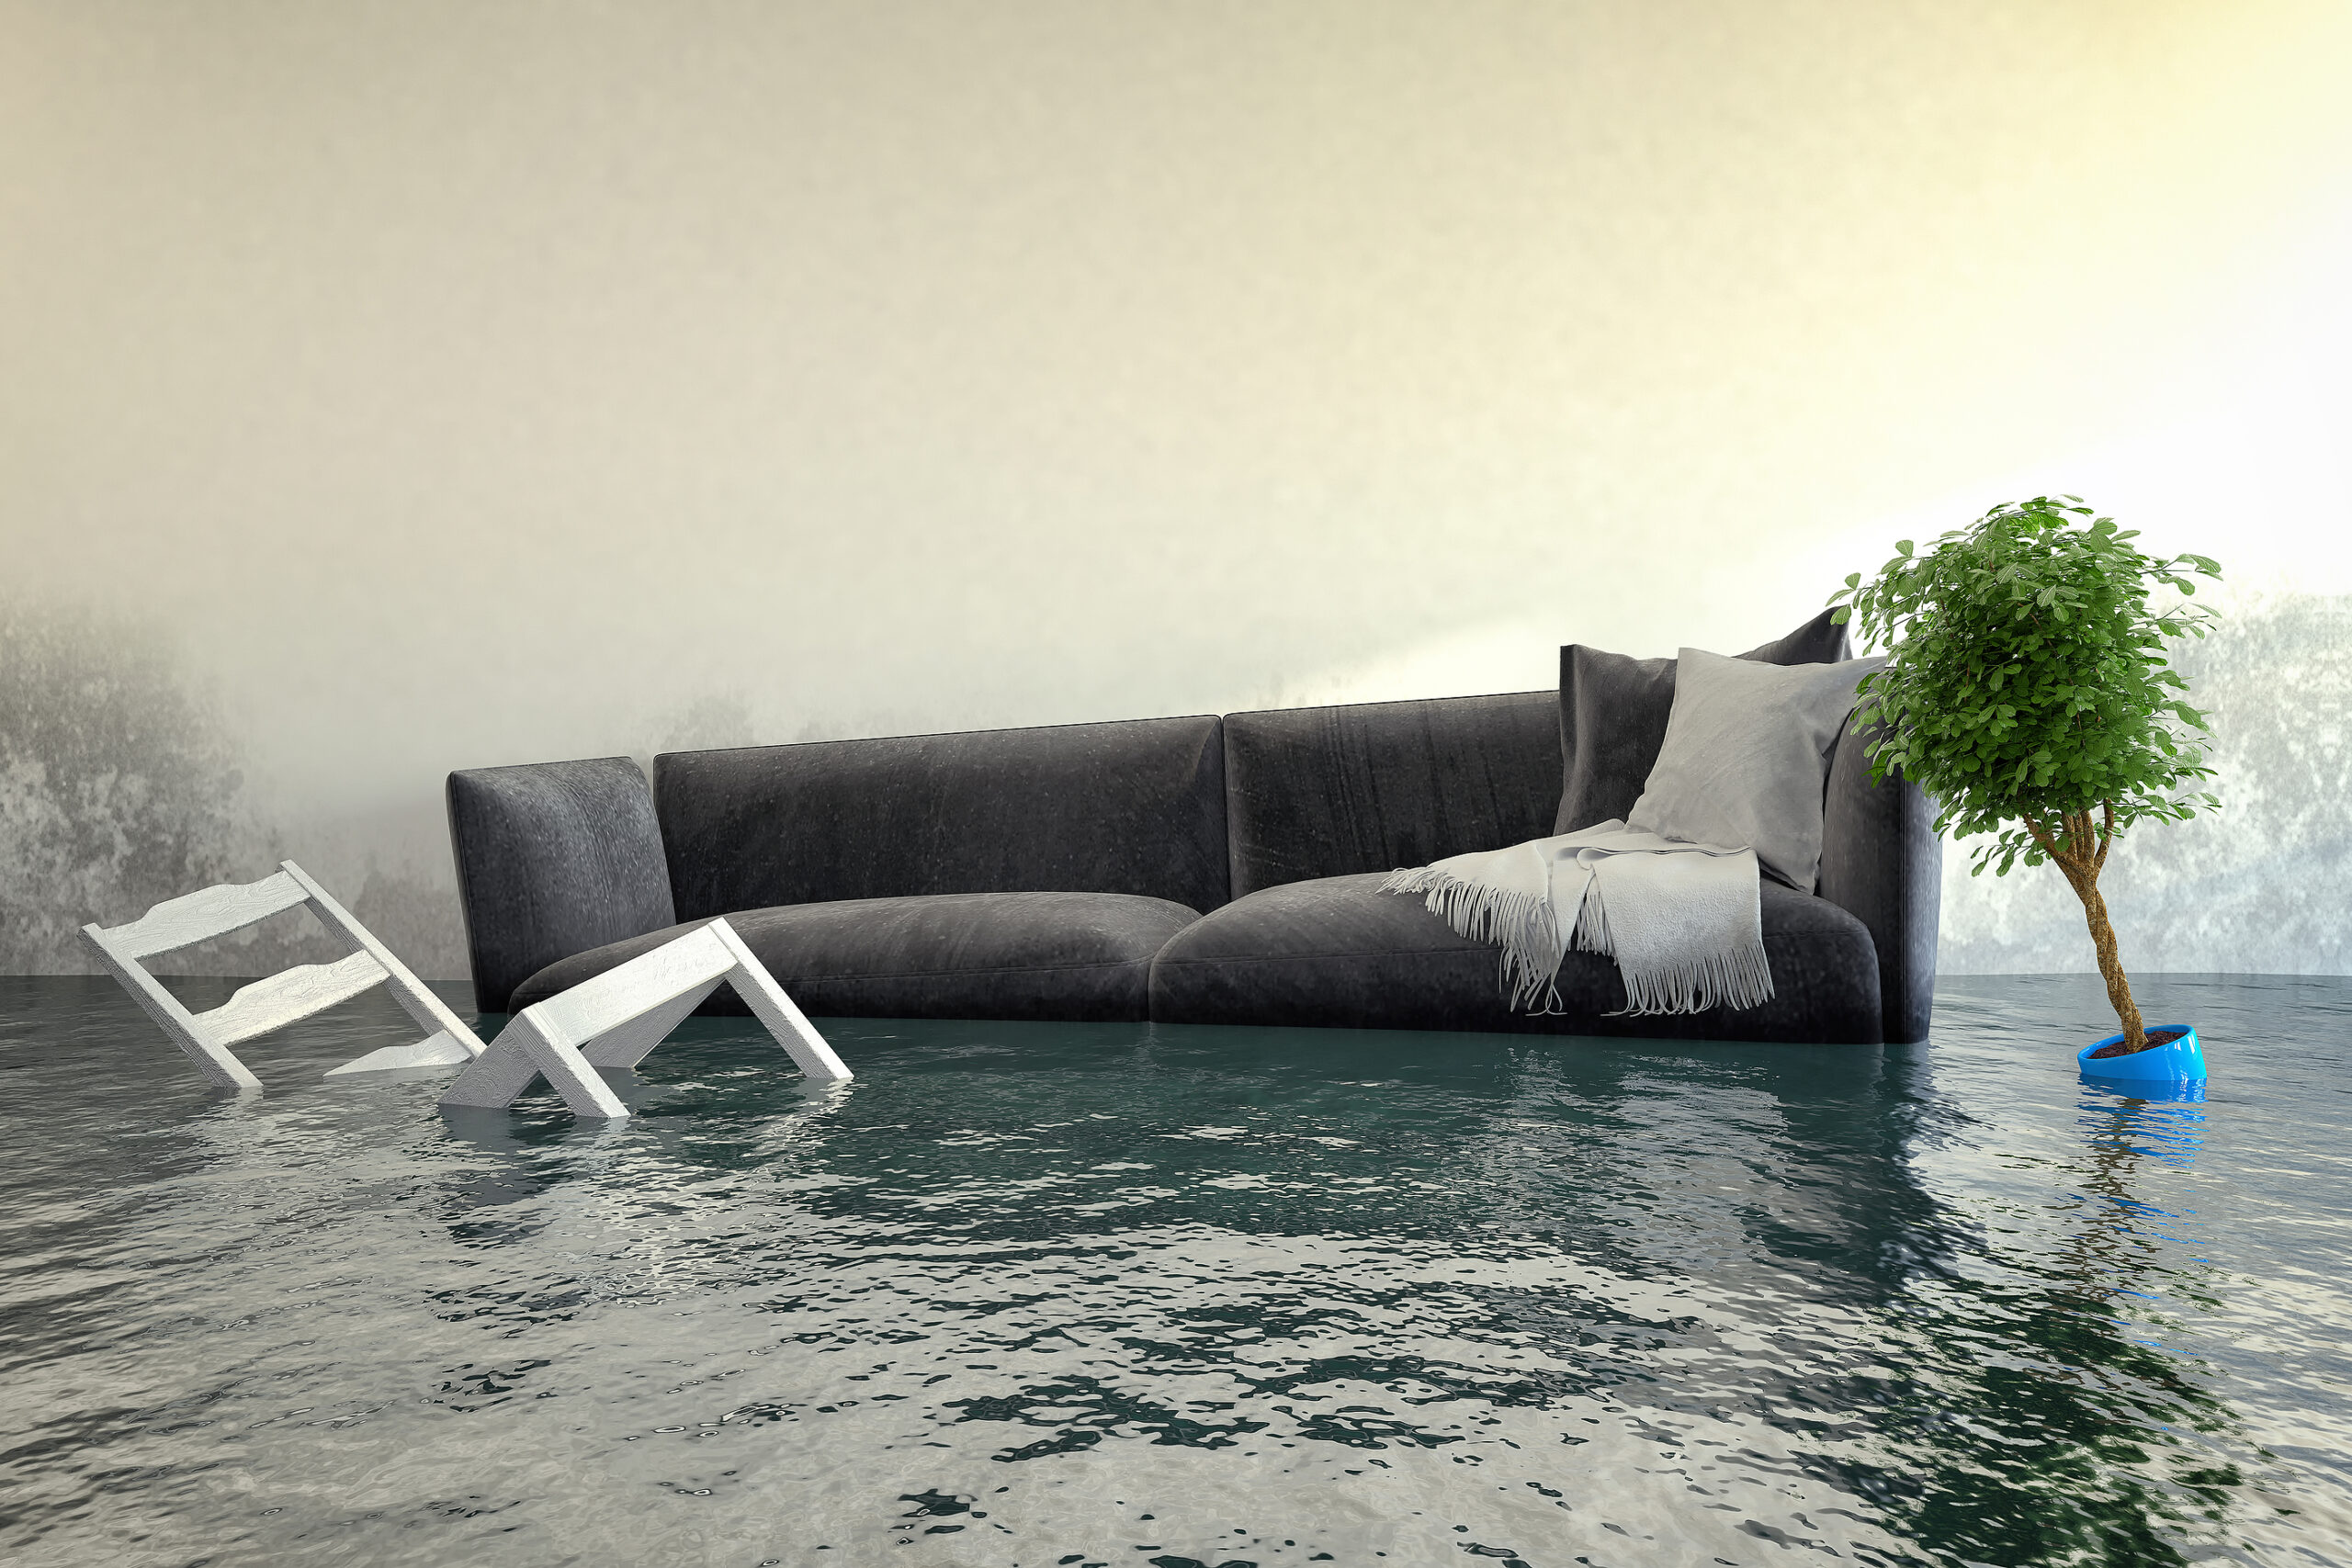 What to do when filing a flood insurance claim